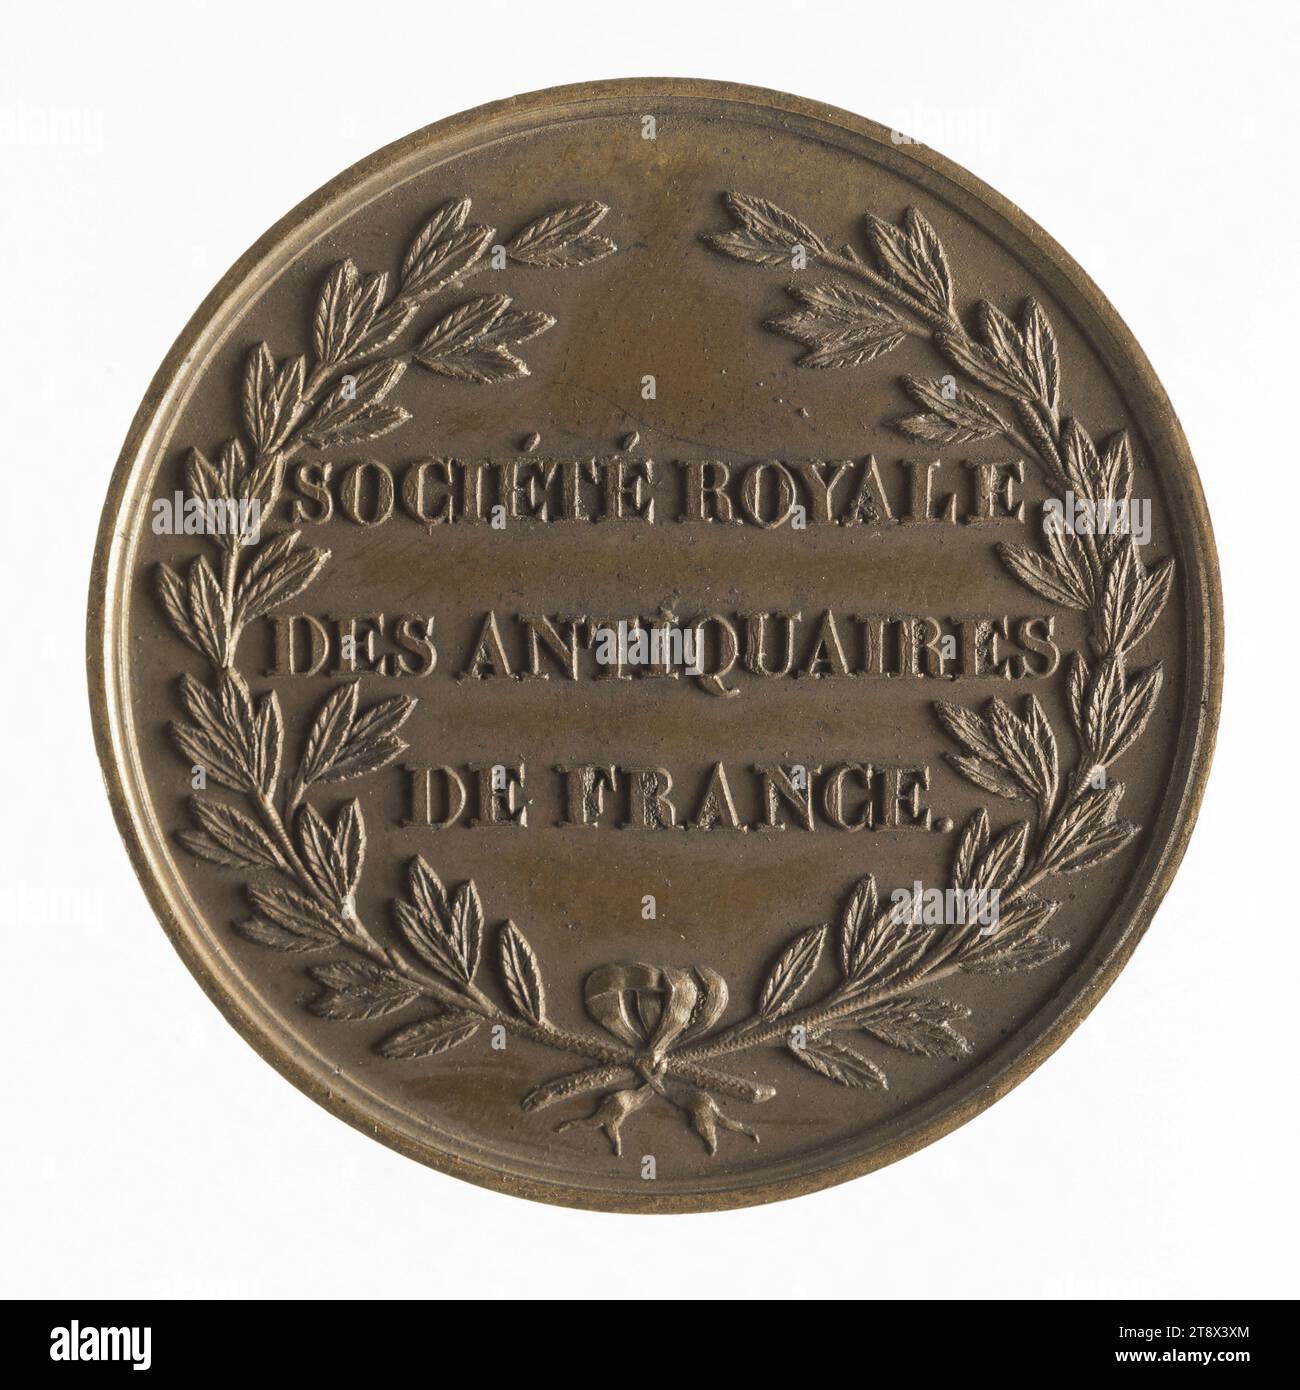 Royal Society of Antiquaries of France, 19th century, Dubois (painter), Engraver in medals, Puymaurin, Jean-Pierre Casimir de Marcassus de, baron, Author of the model, 19th century, Numismatics, Token (numismatics), Bronze, Dimensions - Work: Diameter: 3.3 cm, Weight (type dimension): 17.9 g Stock Photo